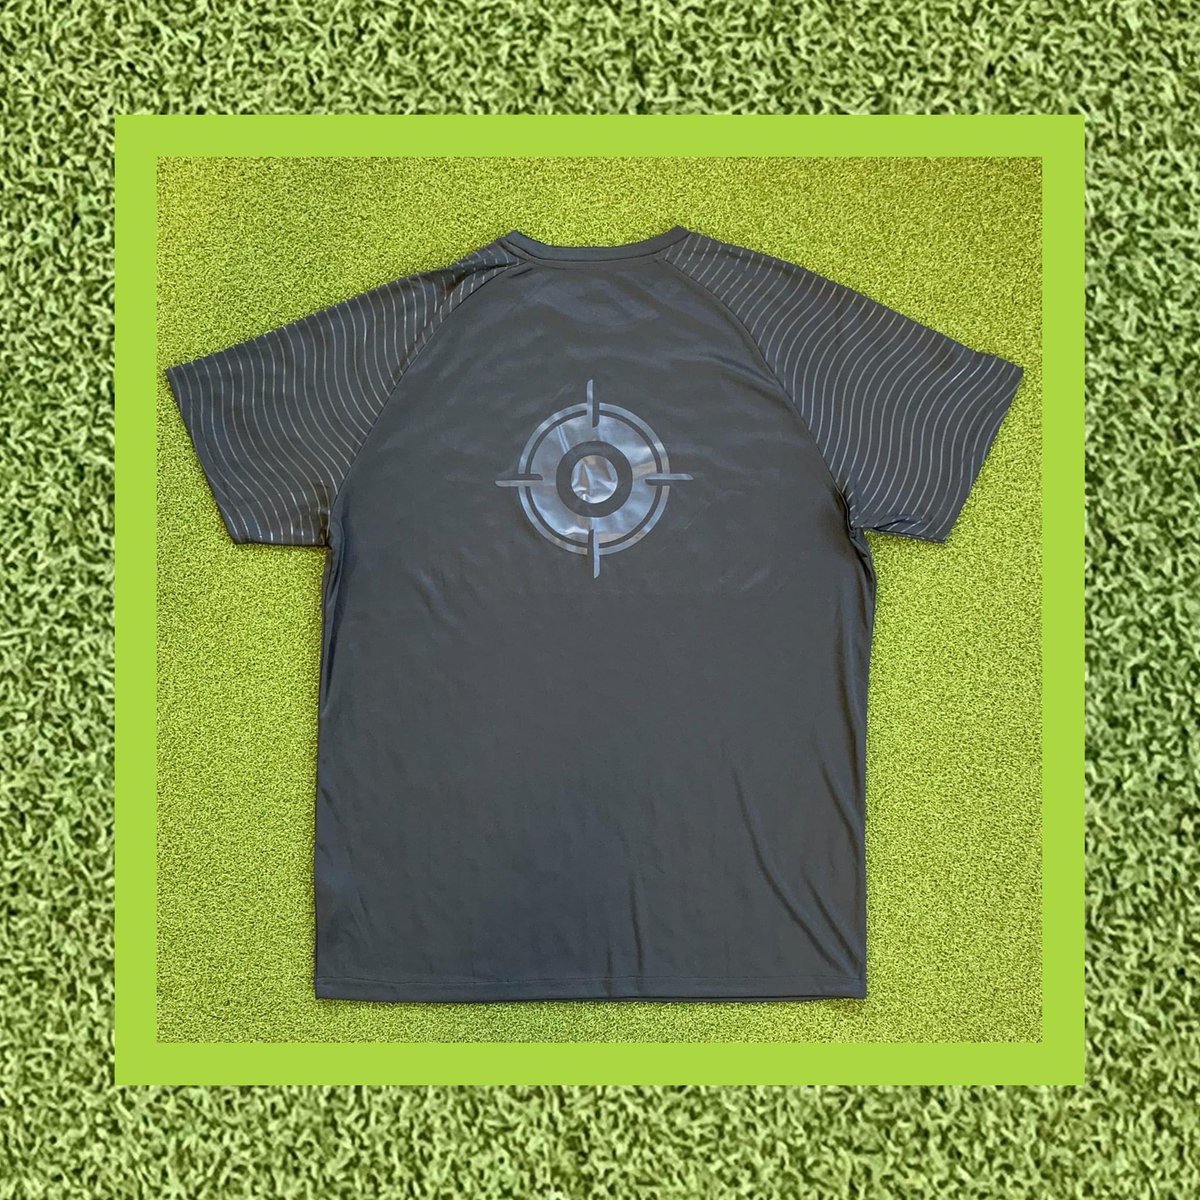 **ZONE FITNESS MENS WORKOUT T-SHIRT**
Guys!
Workout in our latest designed, embossed logo T-Shirt. With the Tri-Dri technology and moisture wicking fabric, you will be sure to keep your cool in any temperature! £18.95 each. 
#tridri #zonefitnesstshirts #zonefitness #workouttop